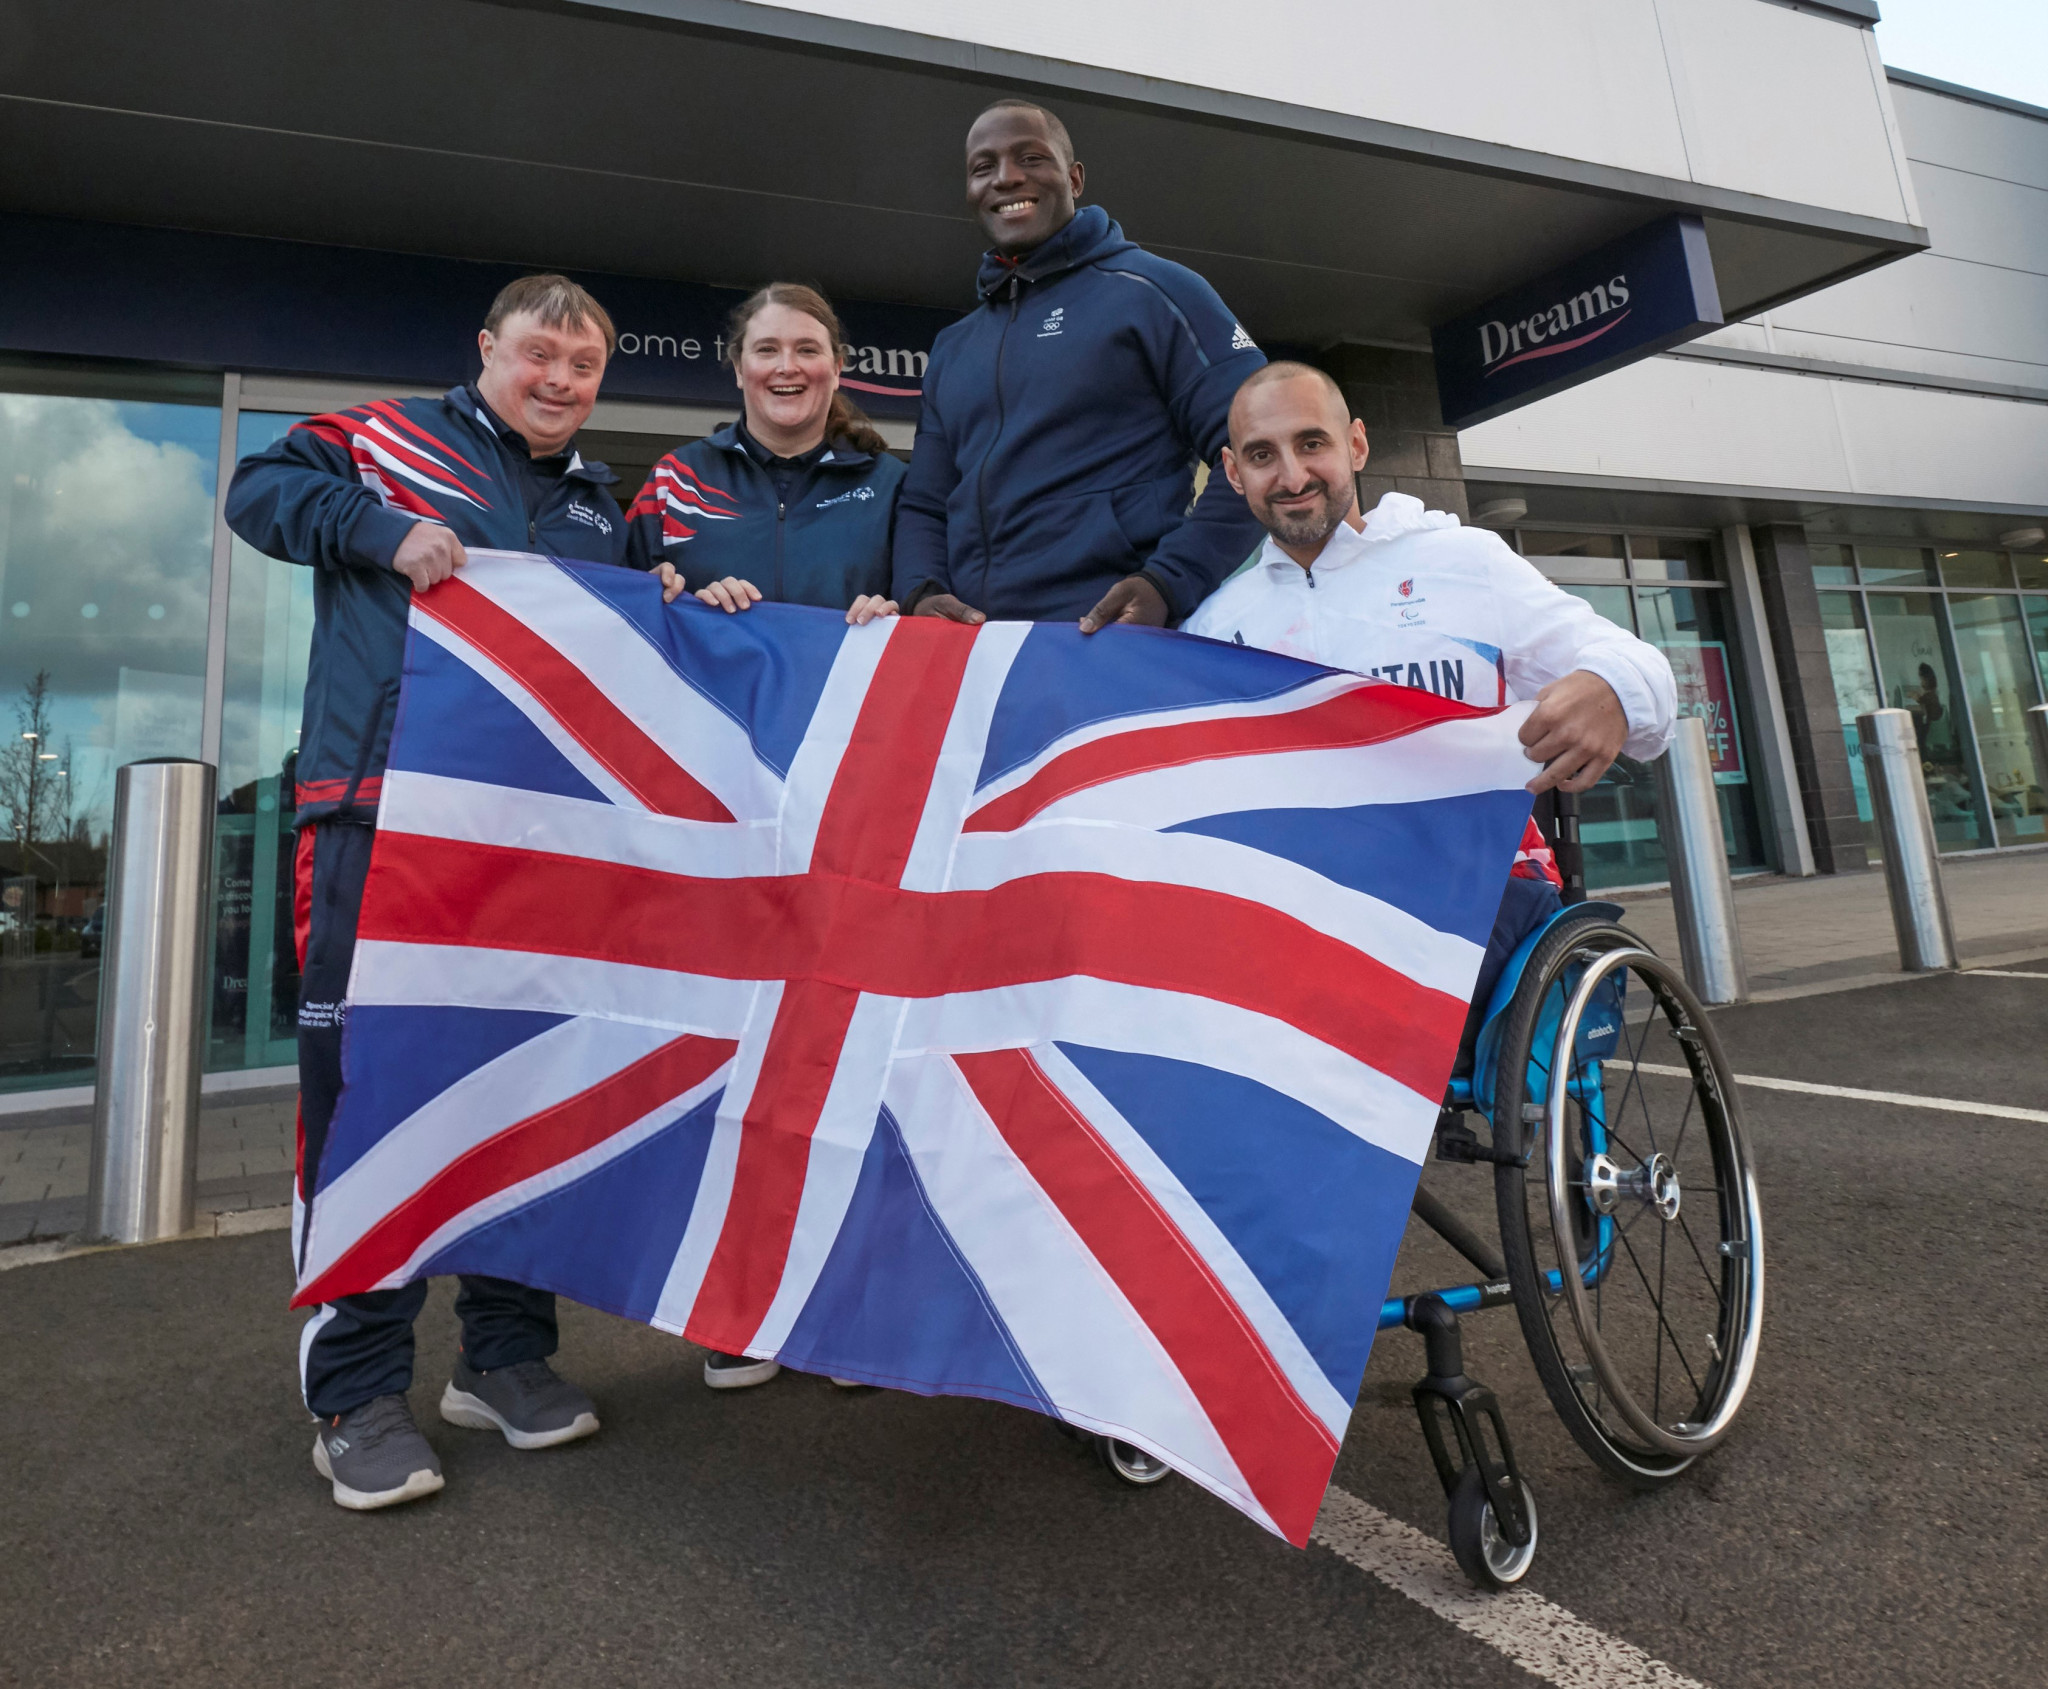 Dreams has become the first brand to sponsor Special Olympics GB, the British Olympic Association and the British Paralympic Association ©Special Olympics GB